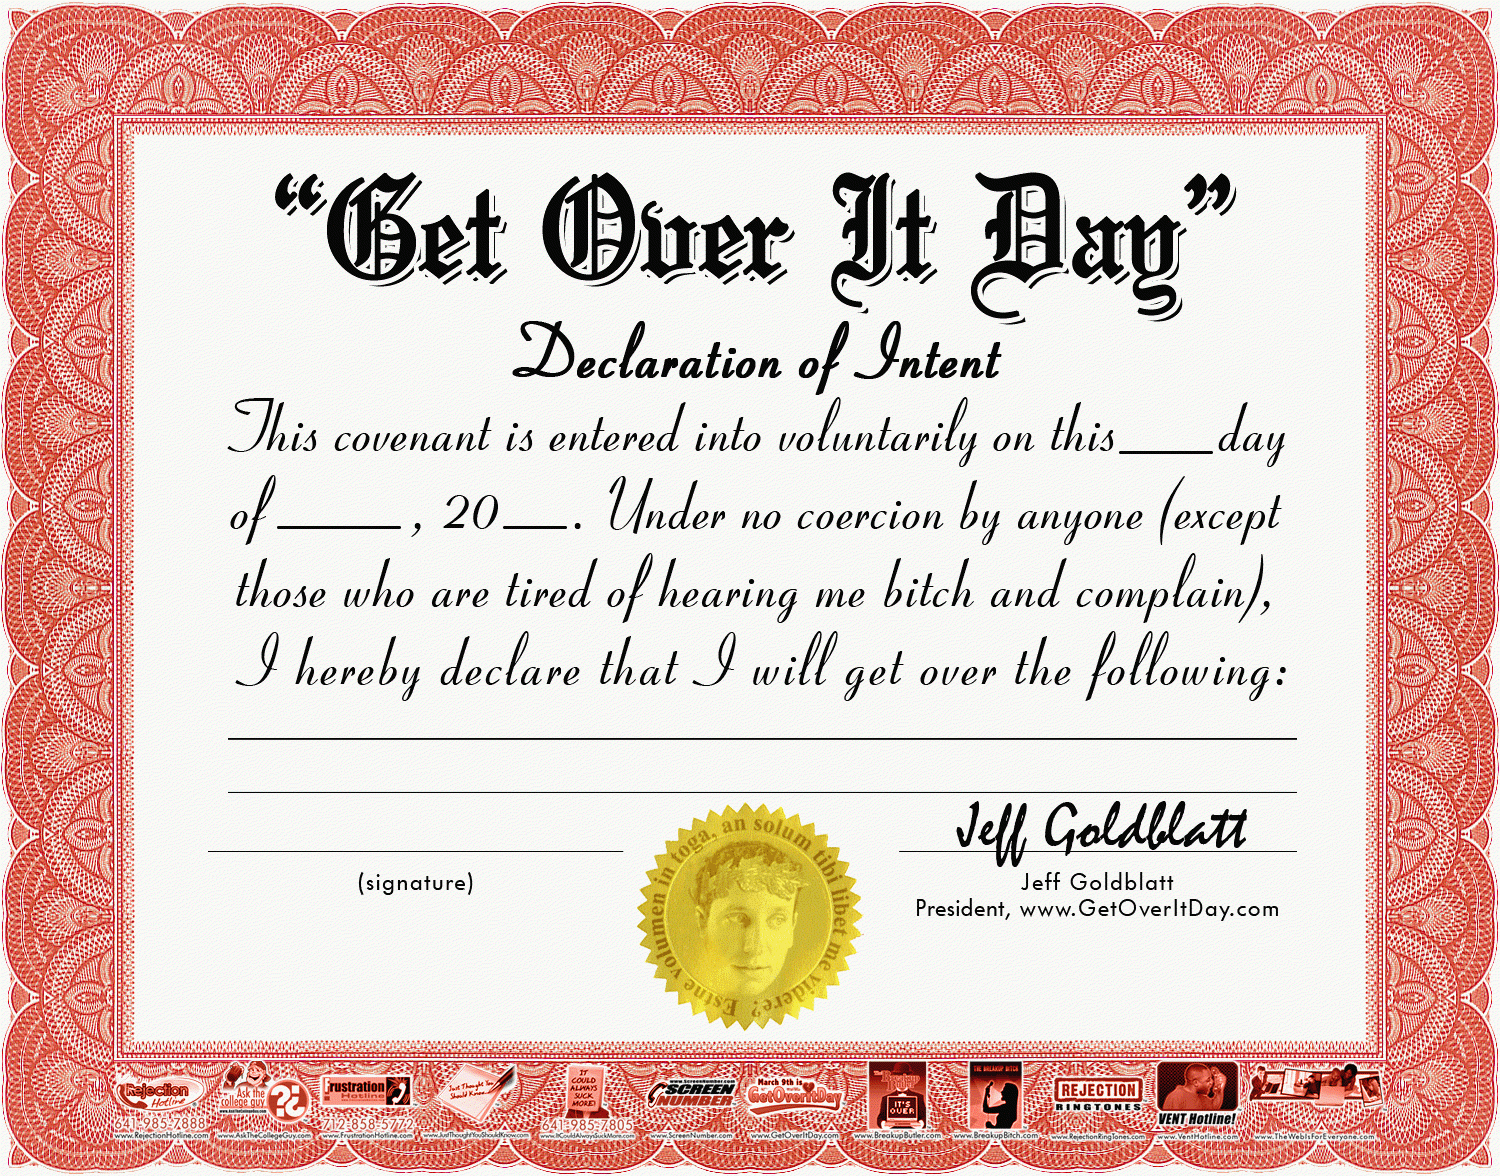 Funny Office Awards Youtube. Silly Certificates Funny Awards With Regard To Funny Certificate Templates